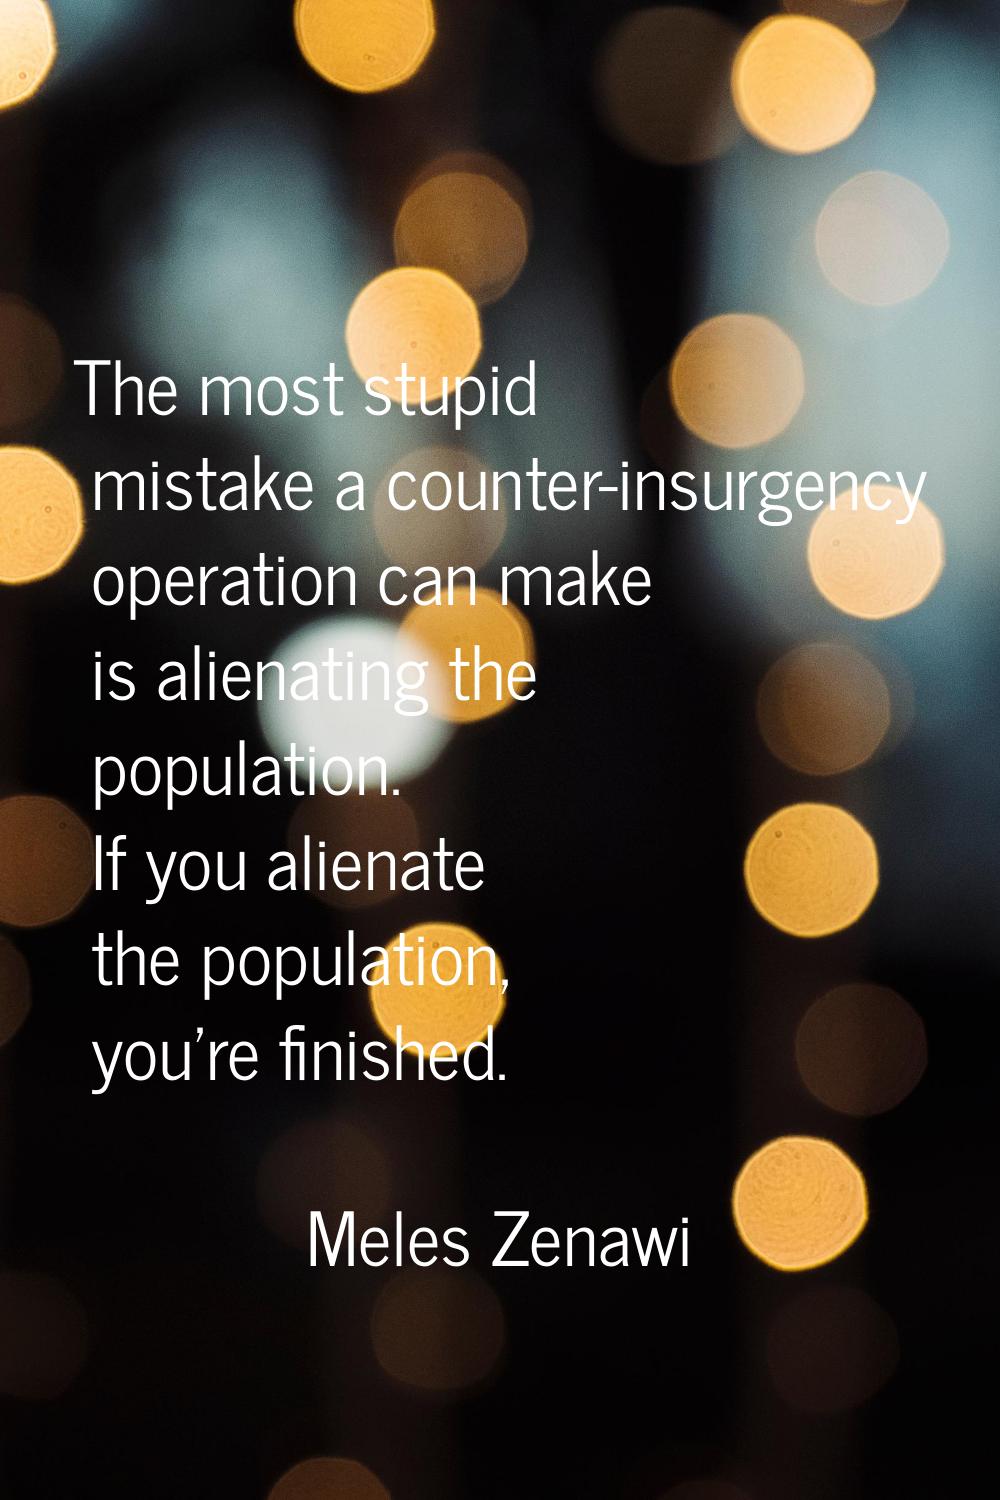 The most stupid mistake a counter-insurgency operation can make is alienating the population. If yo